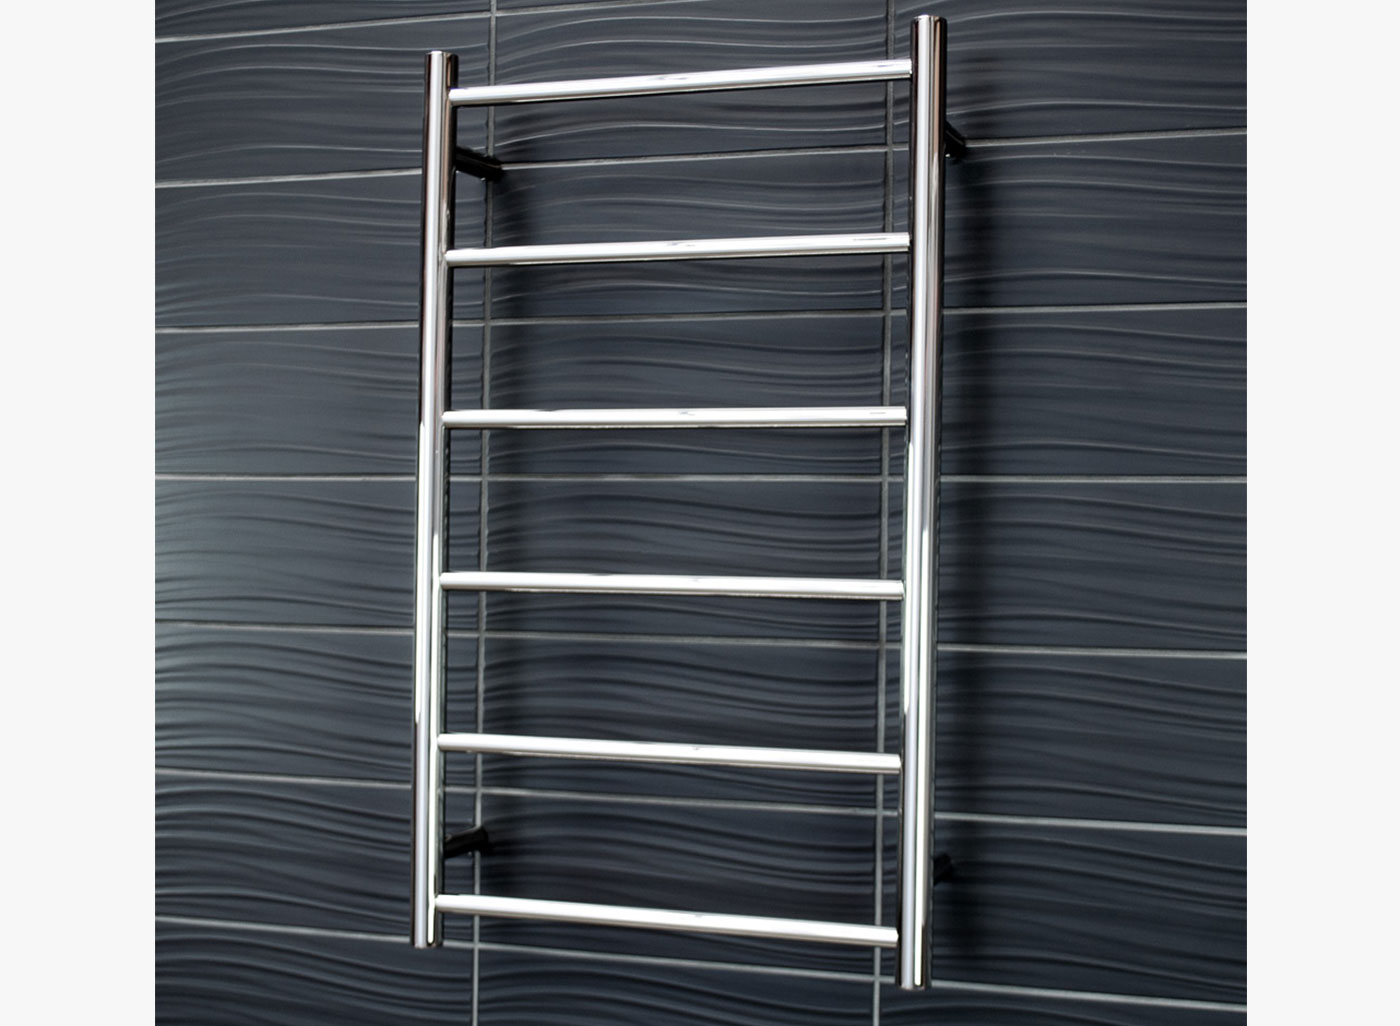 This premium range of 304 grade stainless steel non-heated towel rails are available in a variety of sizes and styles